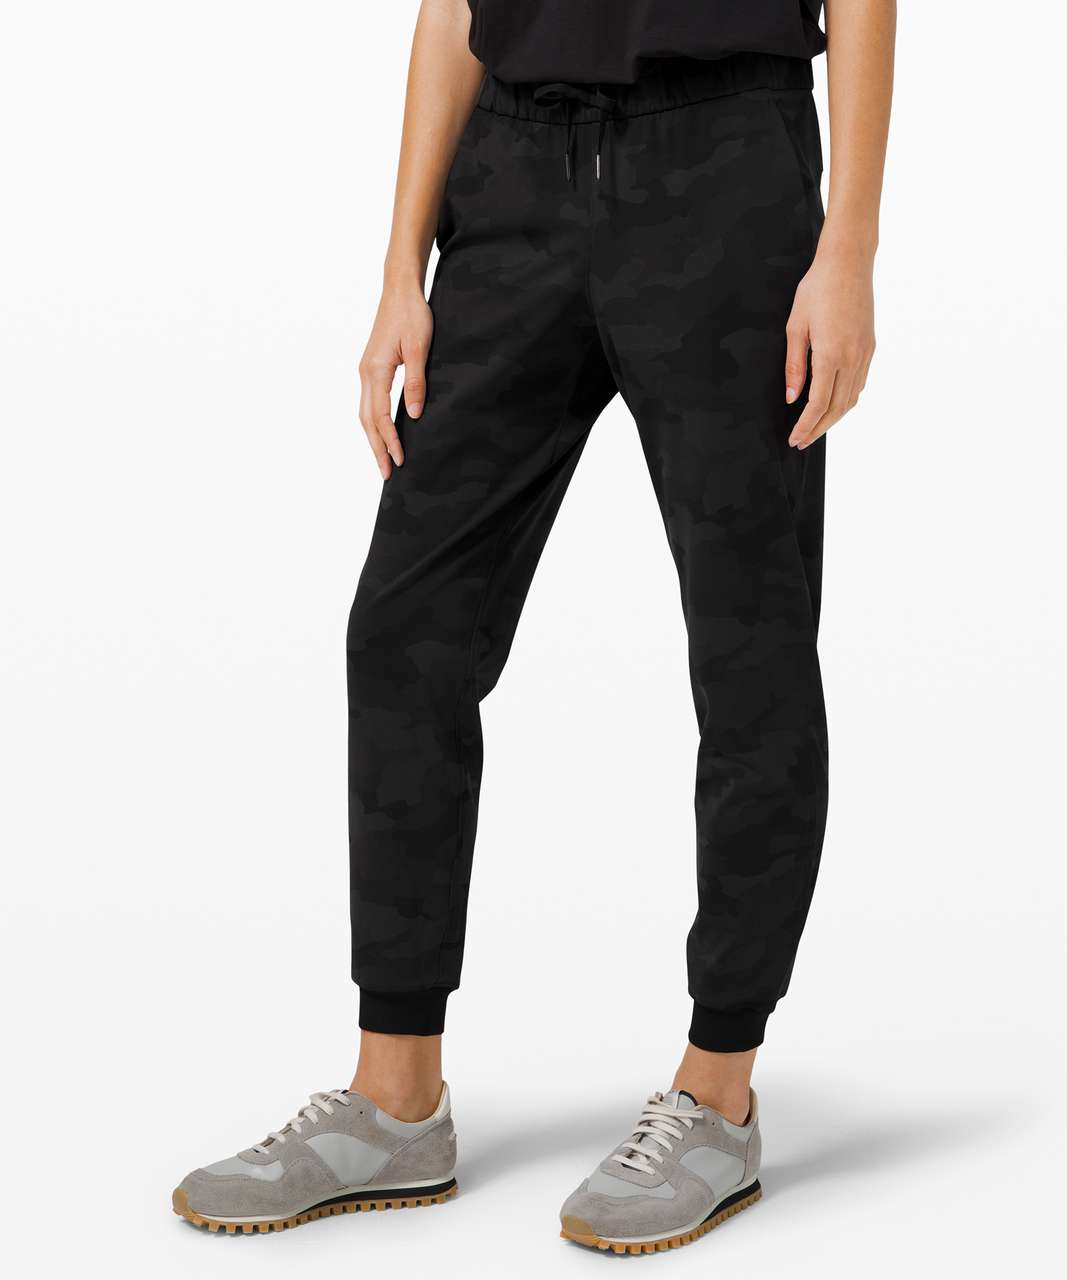 Lululemon GUC 4 On The Fly Formation Camo Pants Black - $62 (36% Off  Retail) - From Megan